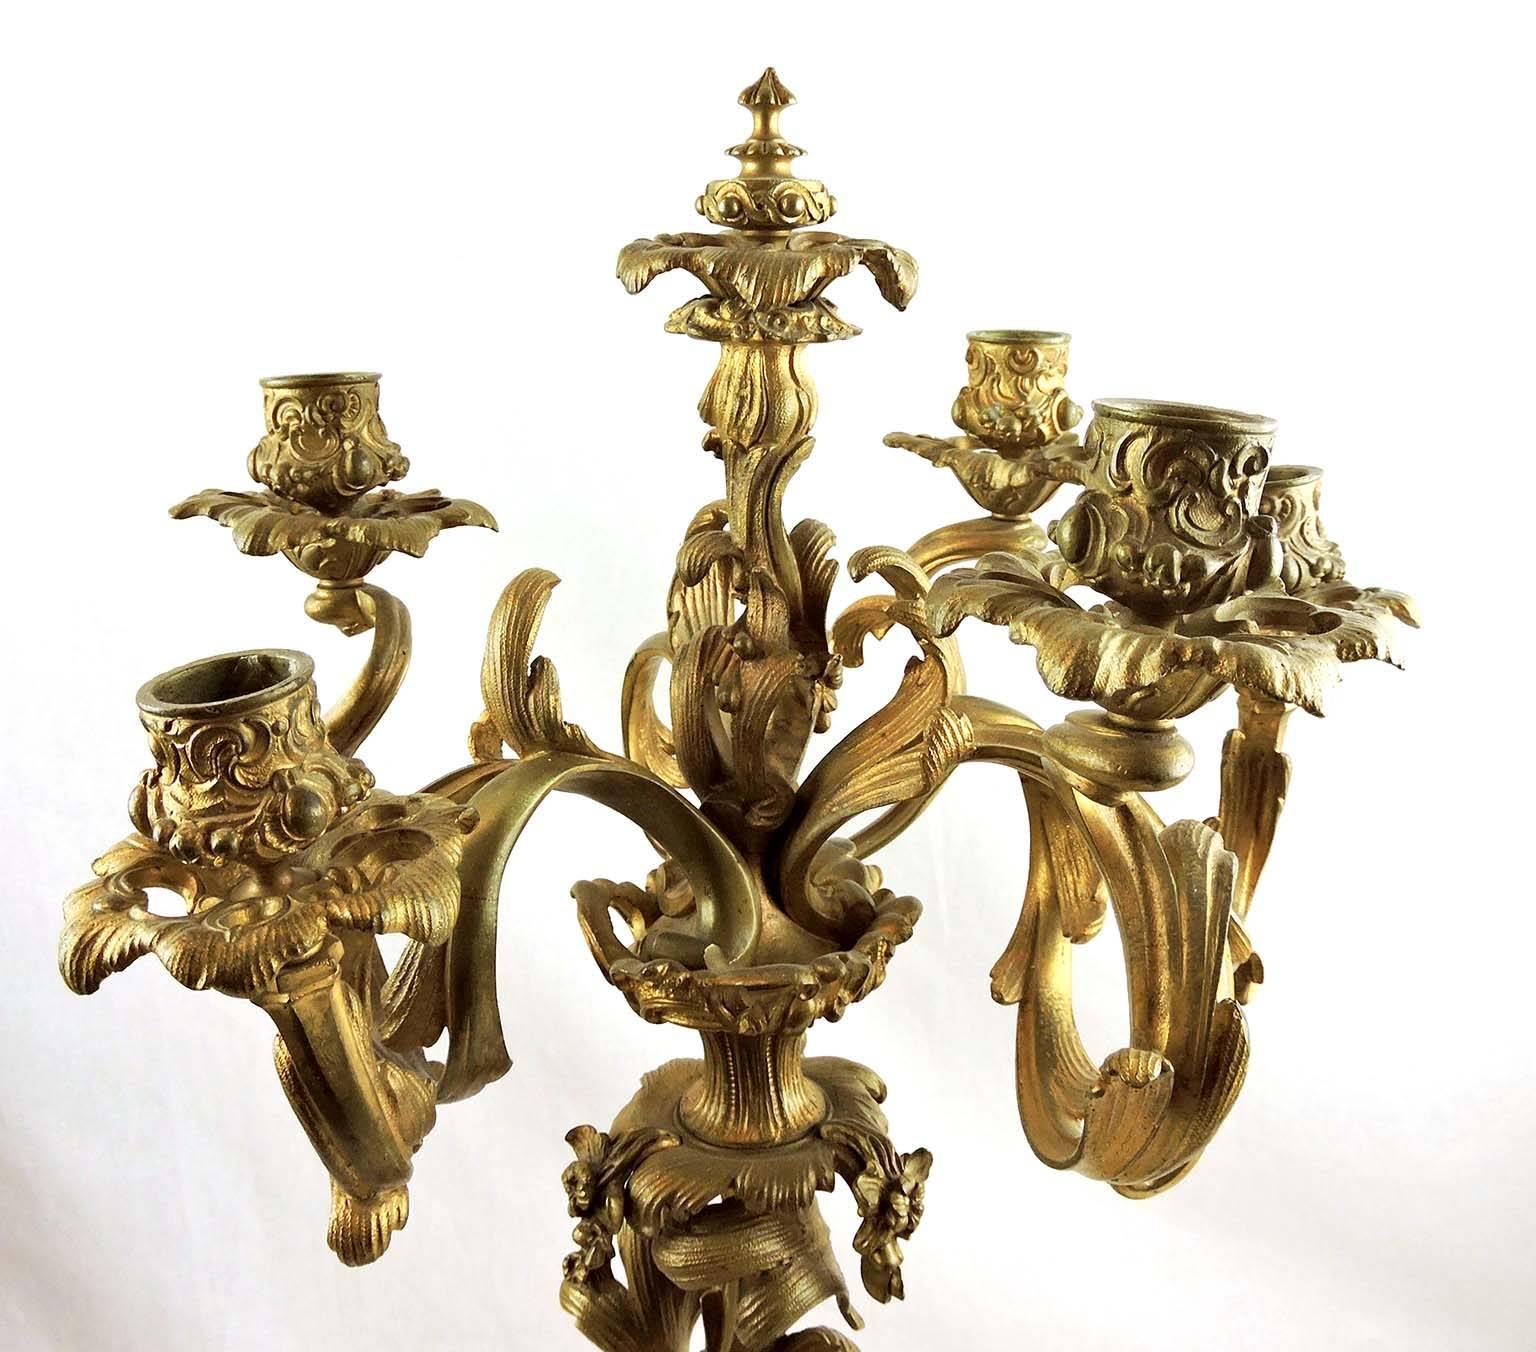 Pair of Large 19th Century Gilt Bronze-Mounted Six-Arm Figural Rococo Candelabra For Sale 3